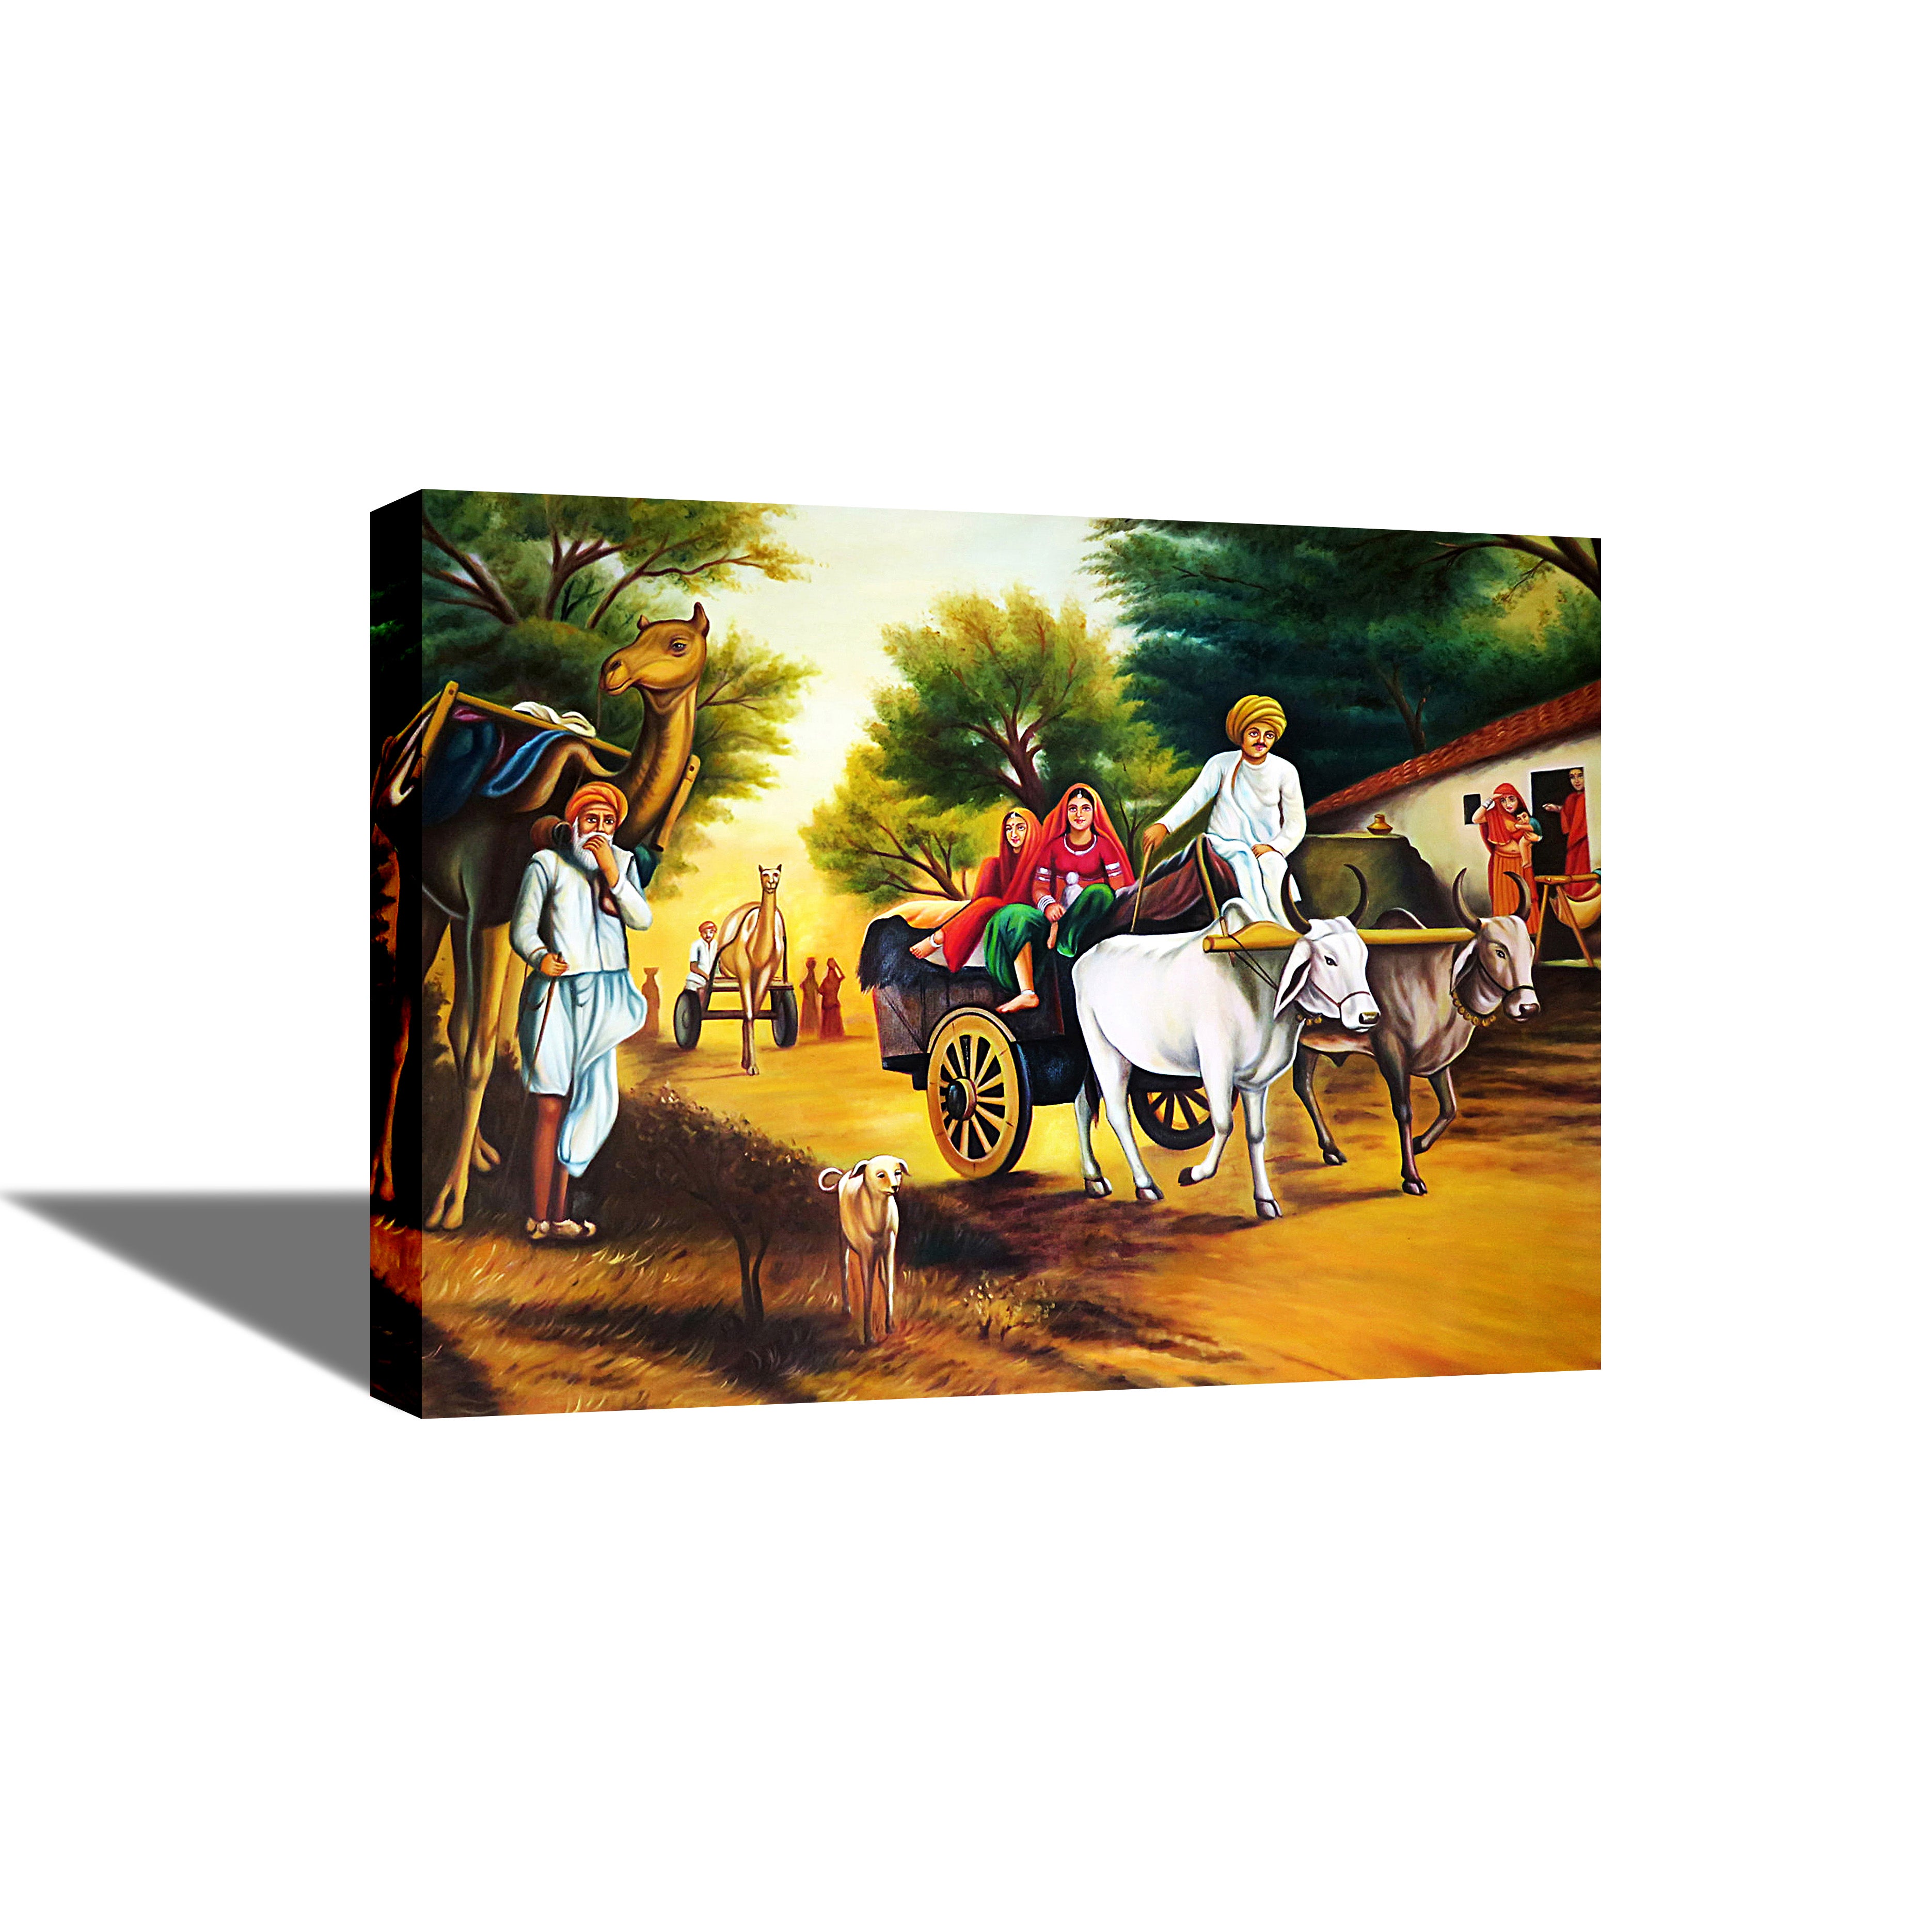 A Day in an Indian Village - Canvas Painting - Framed